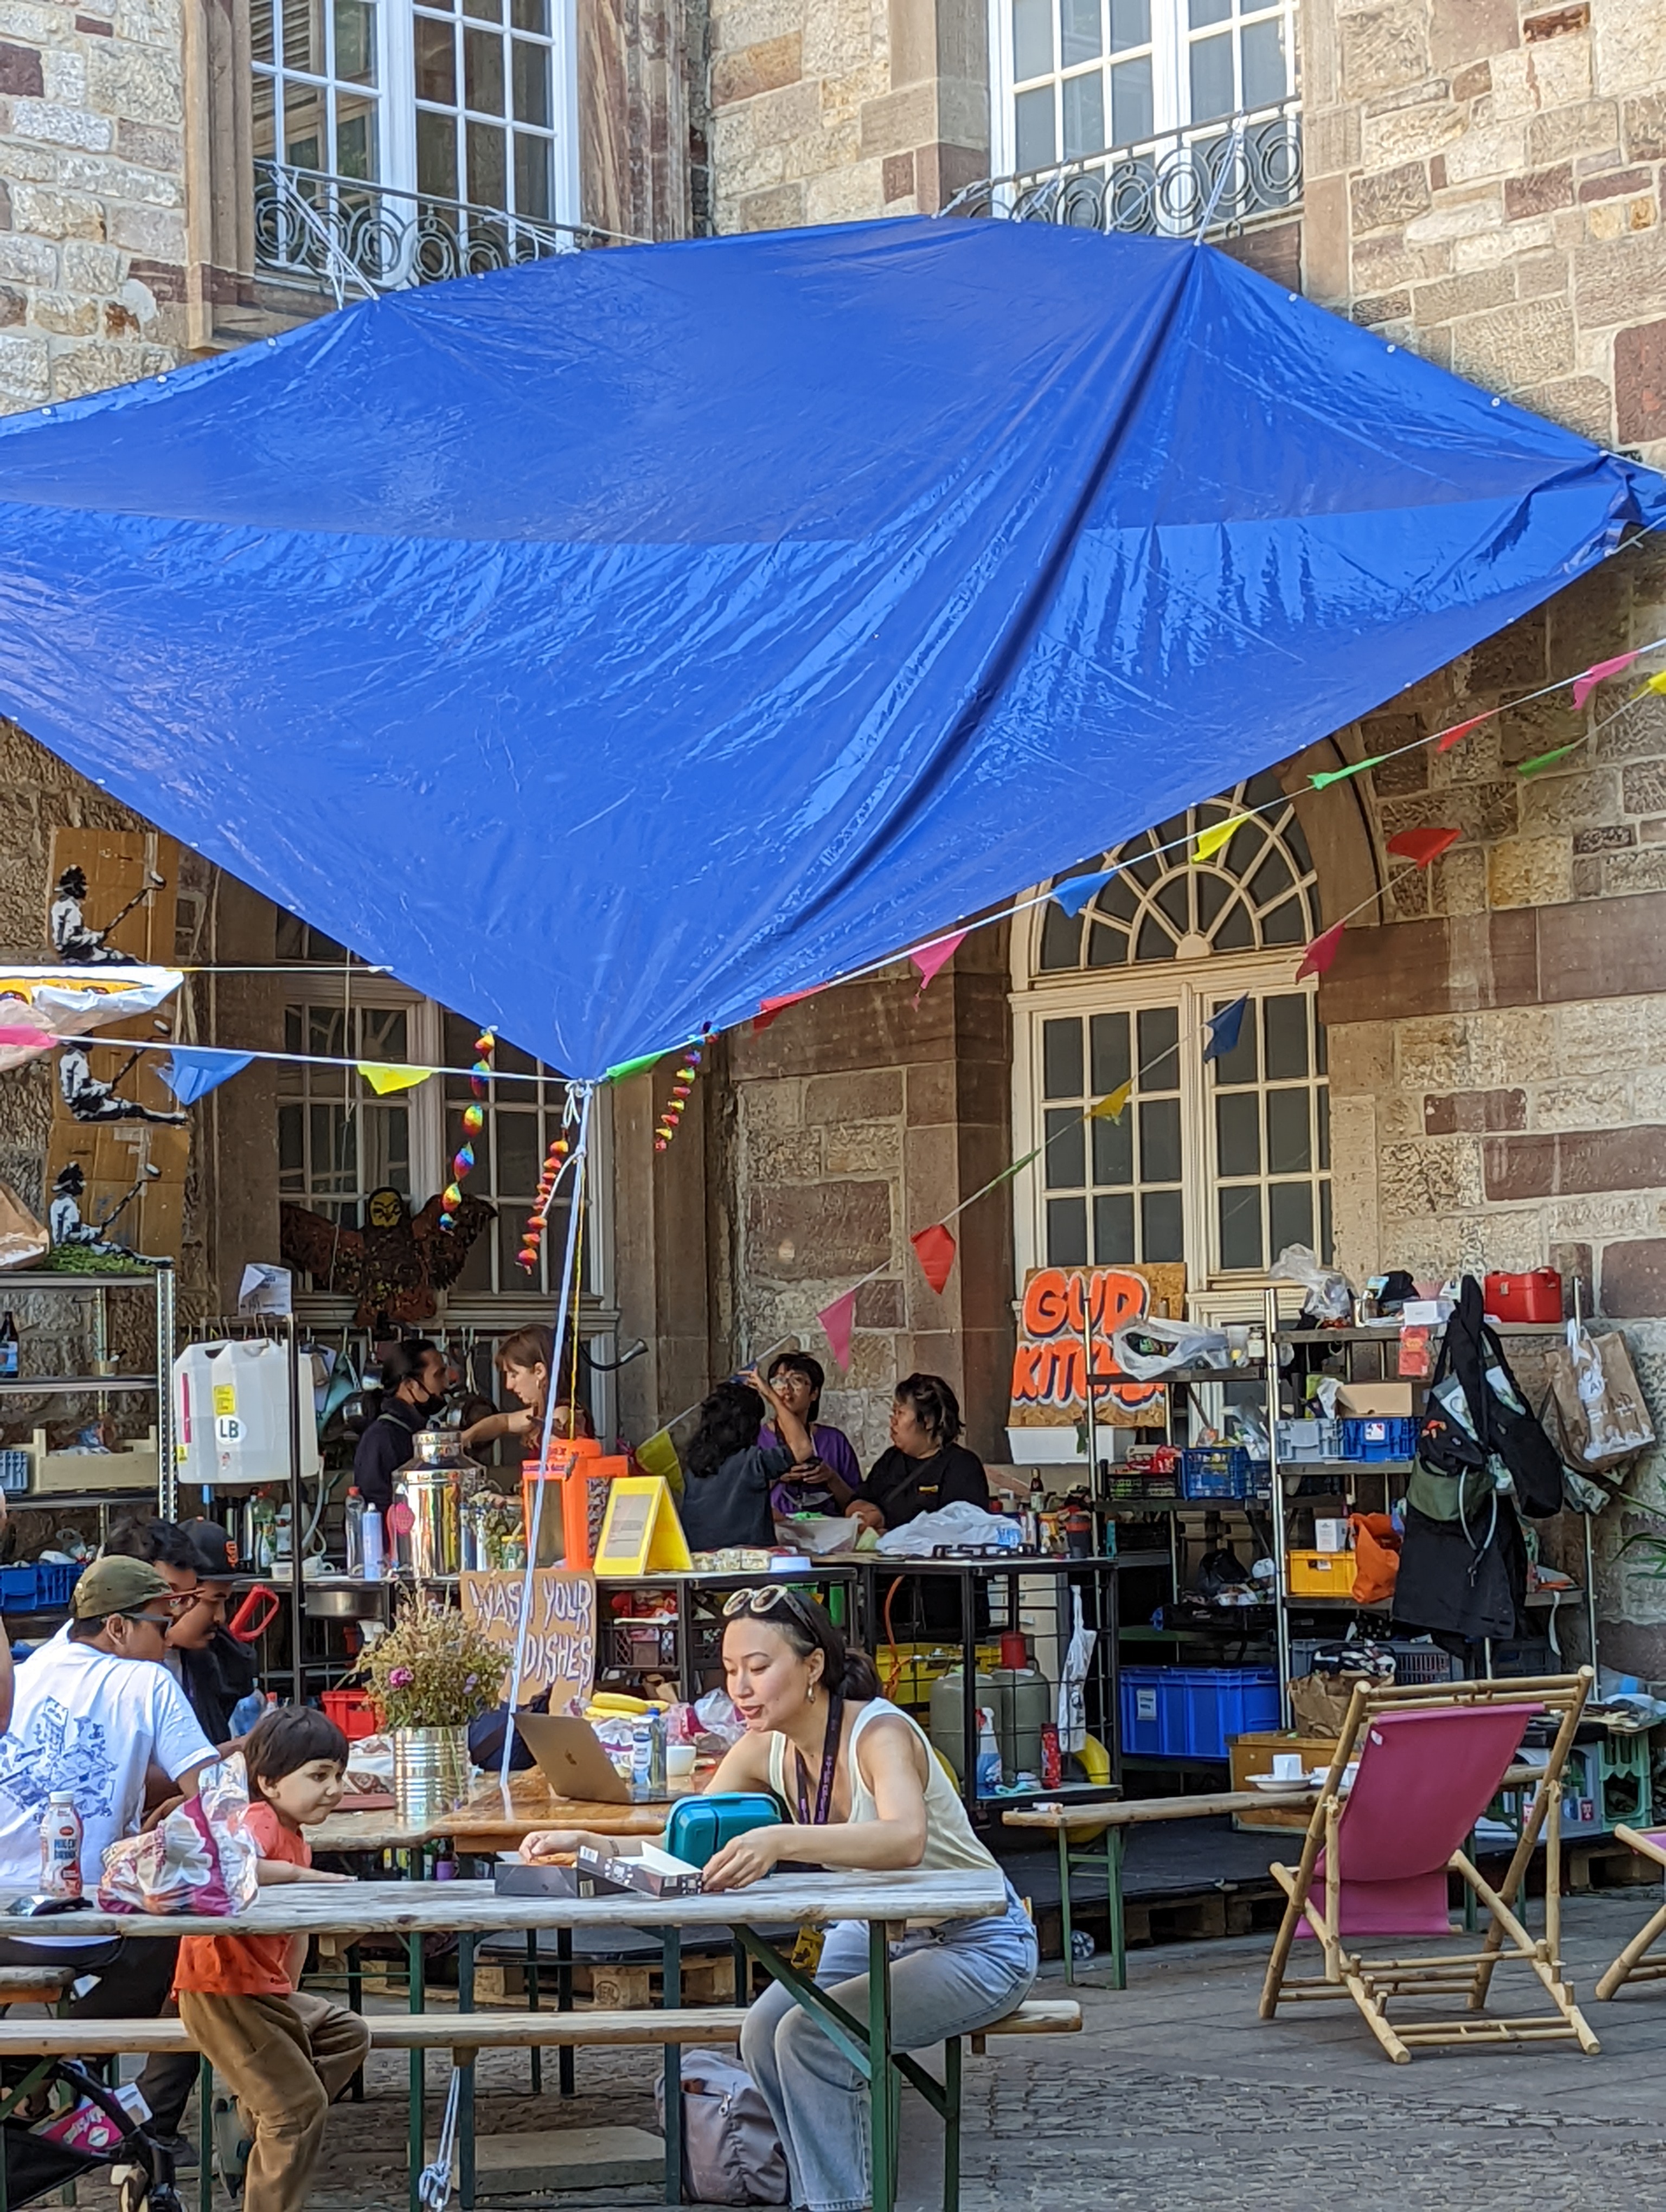 People sit on long benches at tables in a trinket-filled courtyard covered partially by a large blue tarp.